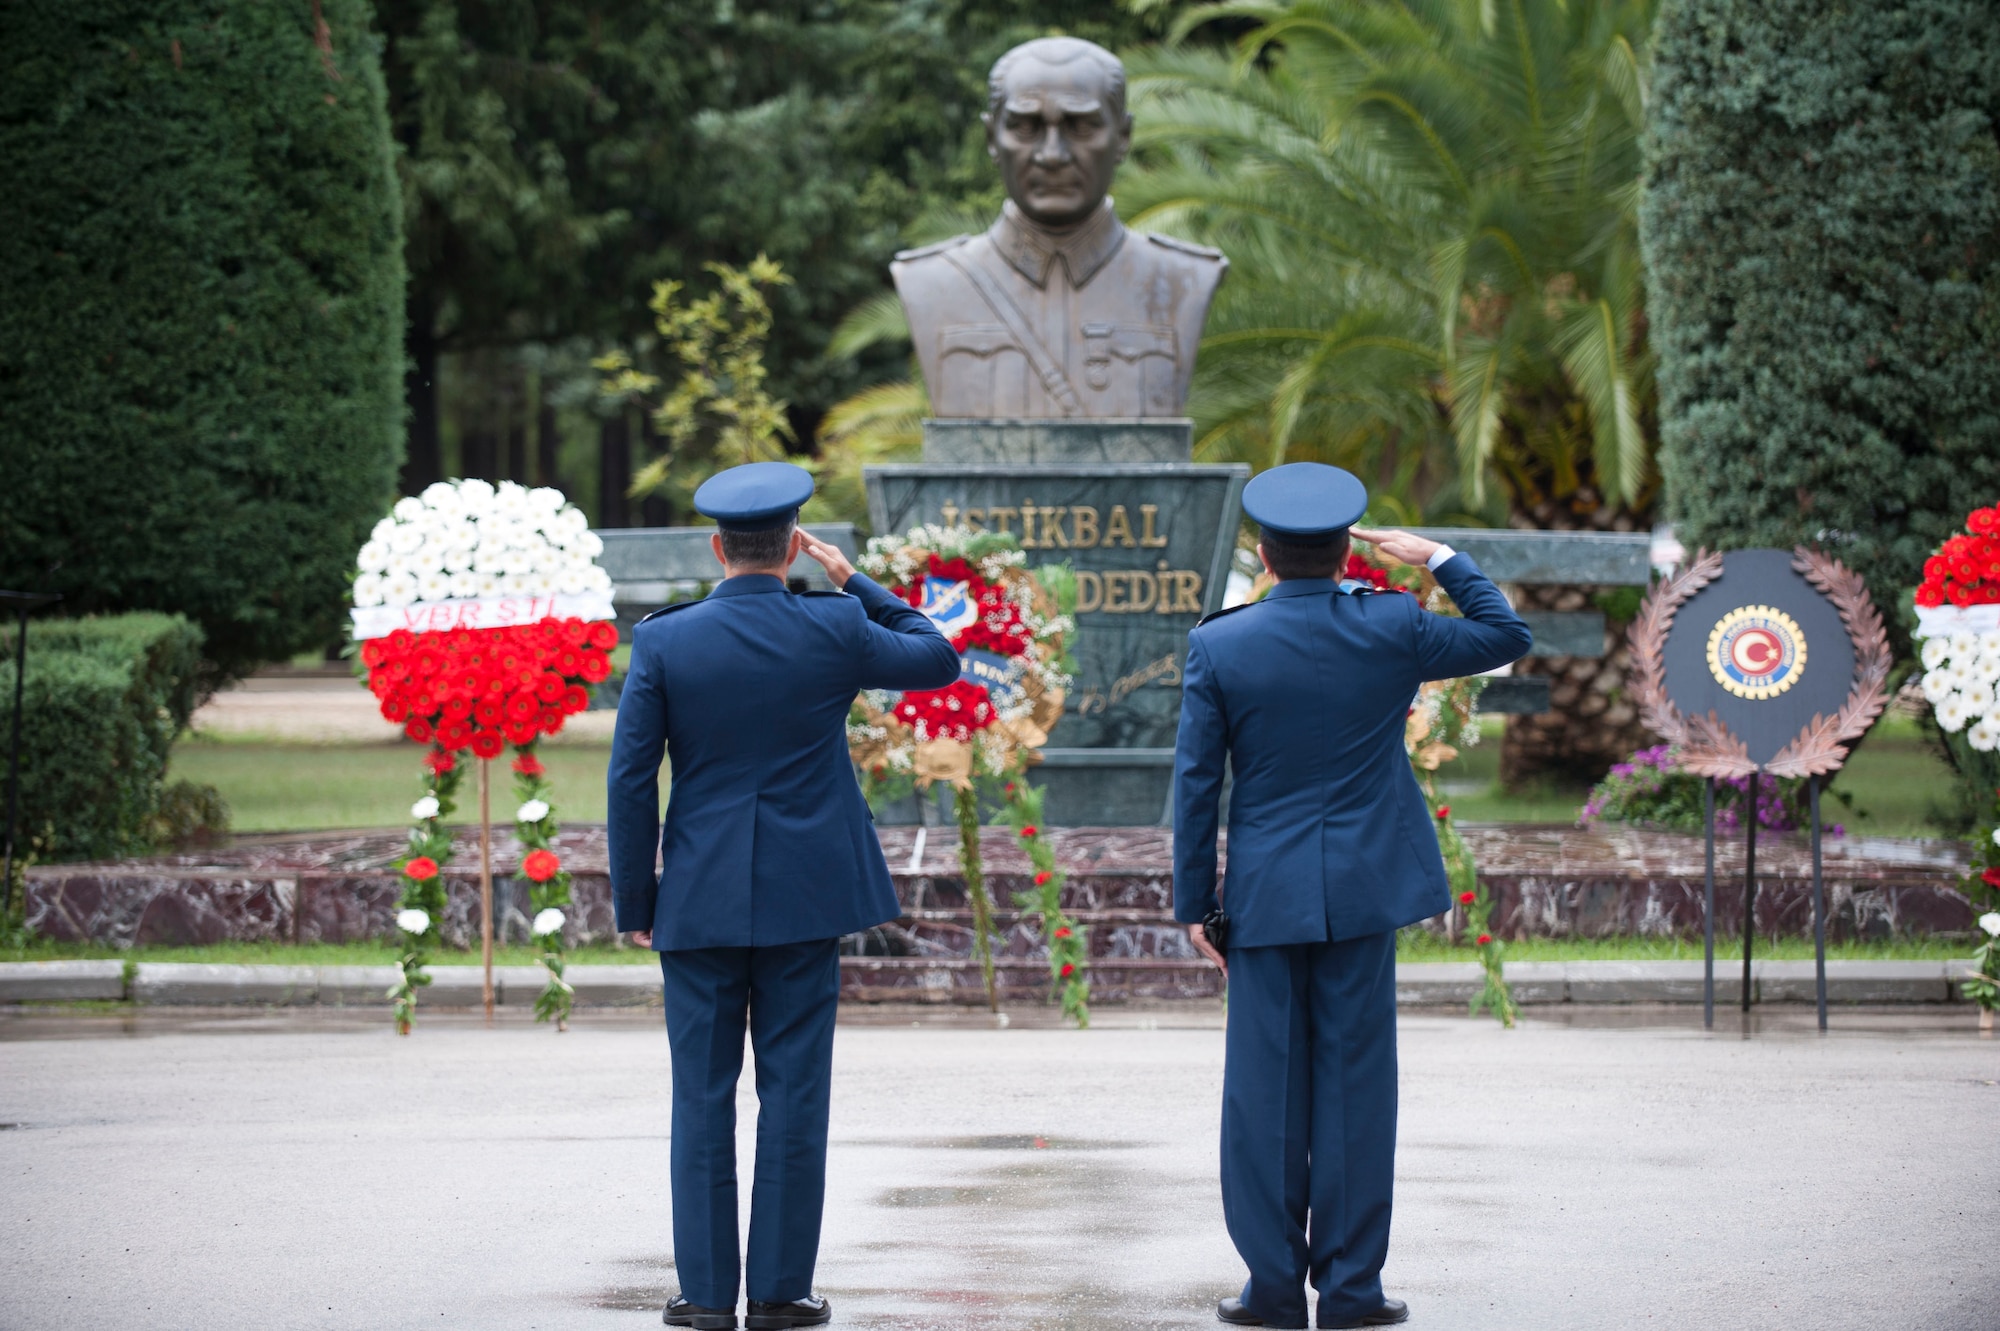 Col. Sean Gallagher, left, 39th Mission Support Group commander, and Turkish air force Lt. Col. Abdullah Demirel, 101st Air Refueling Squadron commander, salute a monument of Mustafa Kemal Ataturk during the Ataturk Memorial Day Ceremony Nov. 10, 2012, at Incirlik Air Base, Turkey. The ceremony brought members from across the base together to honor Ataturk, the founder and first president of modern Turkey. (U.S. Air Force photo by Senior Airman Clayton Lenhardt/Released)